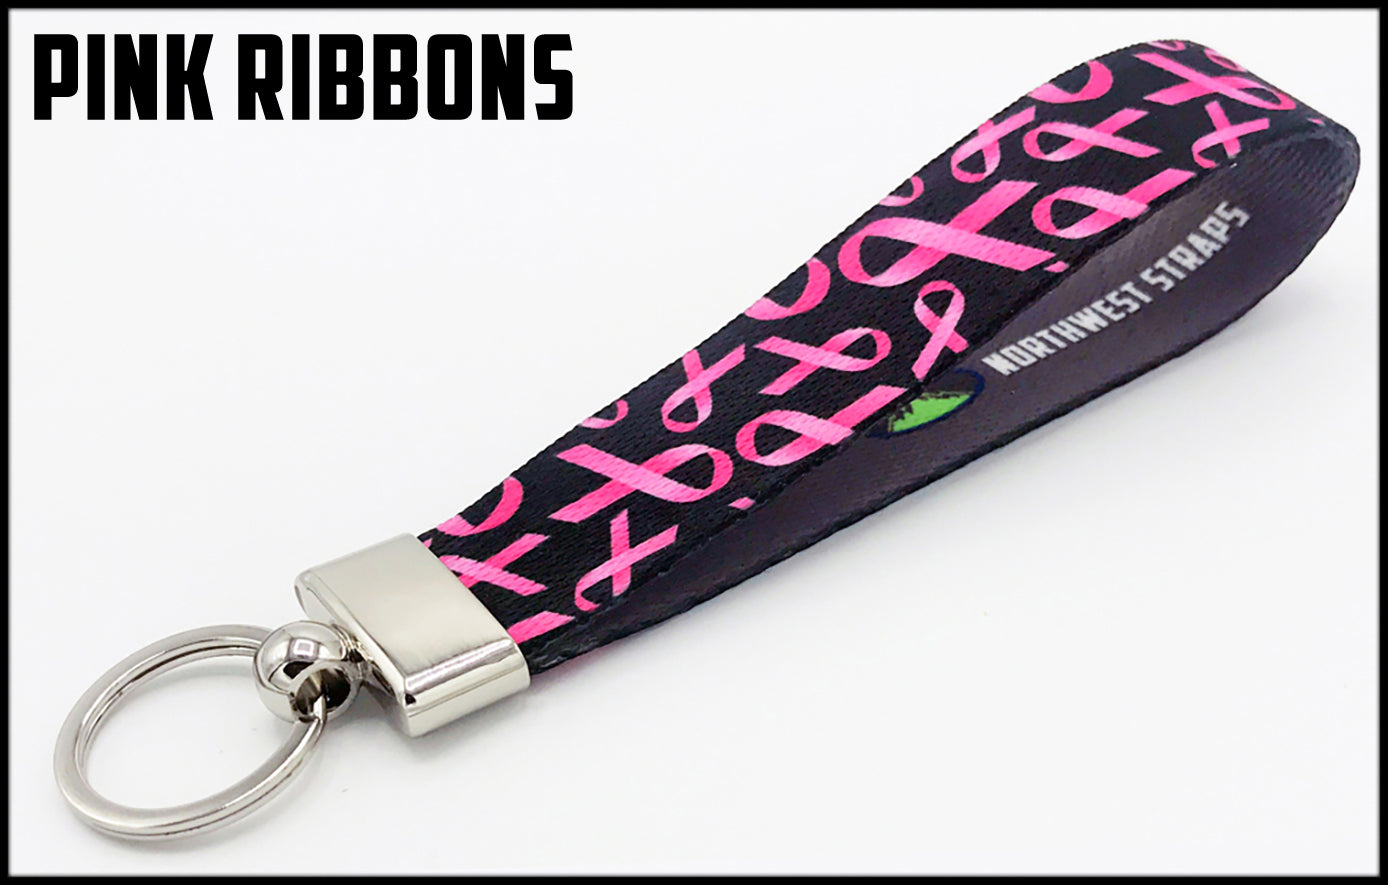 Pink ribbons on black background. 1 inch custom picture quality polyester webbing keyfob. Design by Northwest Straps.